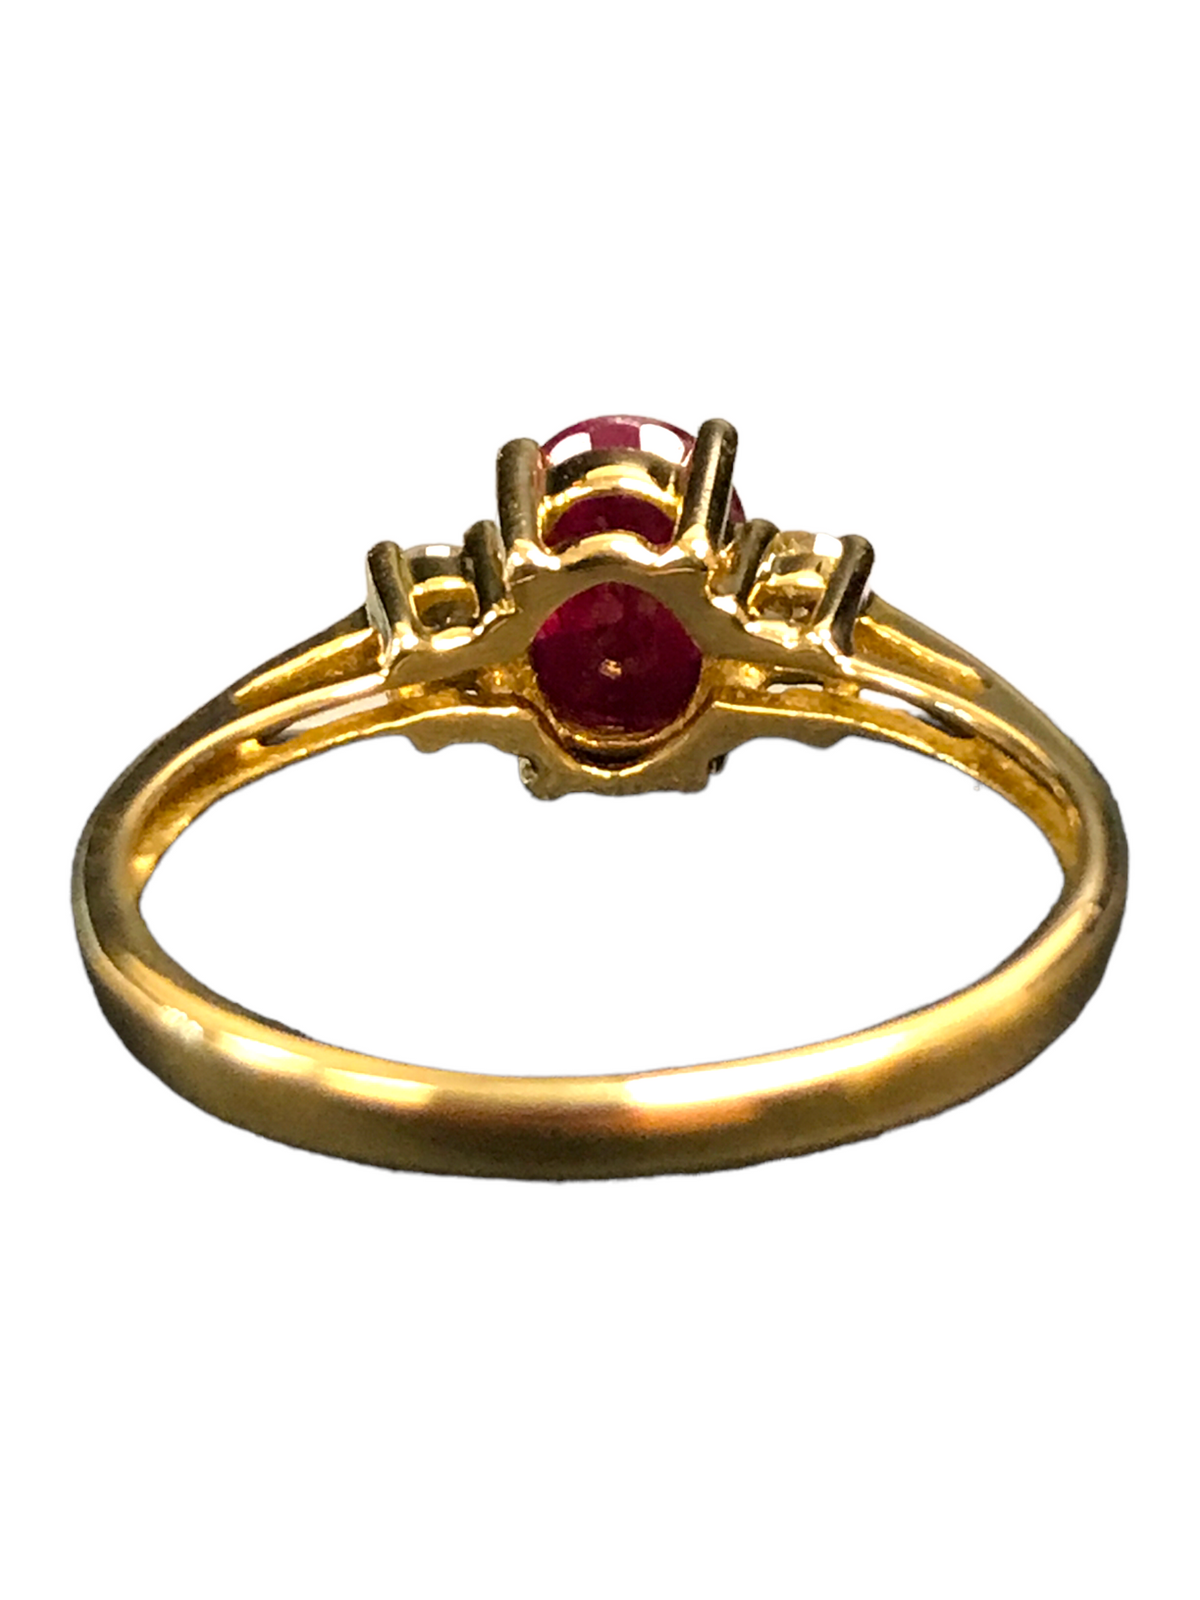 18kt Yellow Gold Ruby and Diamond Ladies Ring Size 5.75